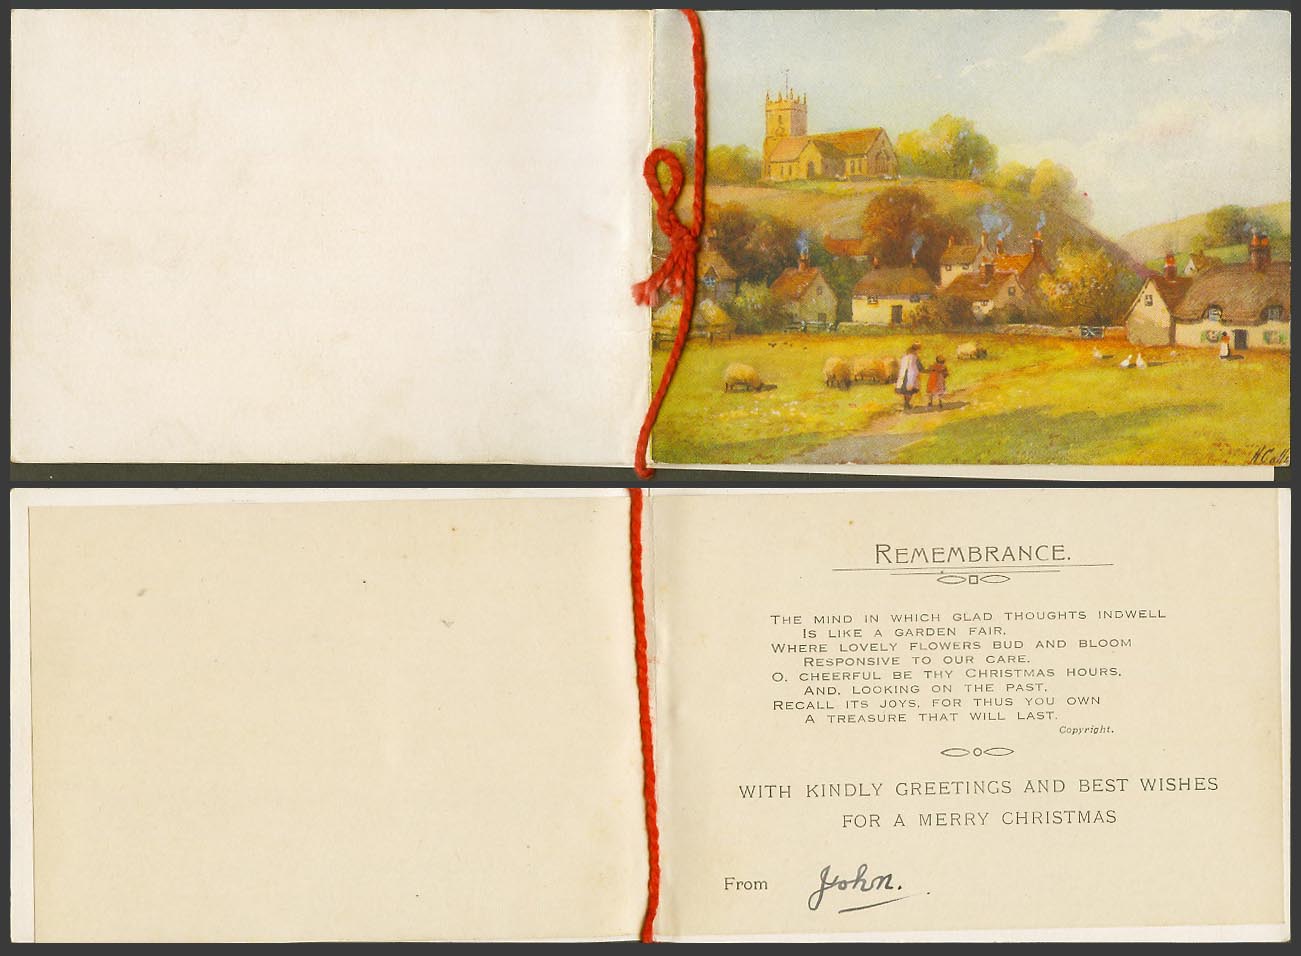 H. Calle Artist Signed, SHEEP Church Cottages Xmas Old Greeting Card Remembrance